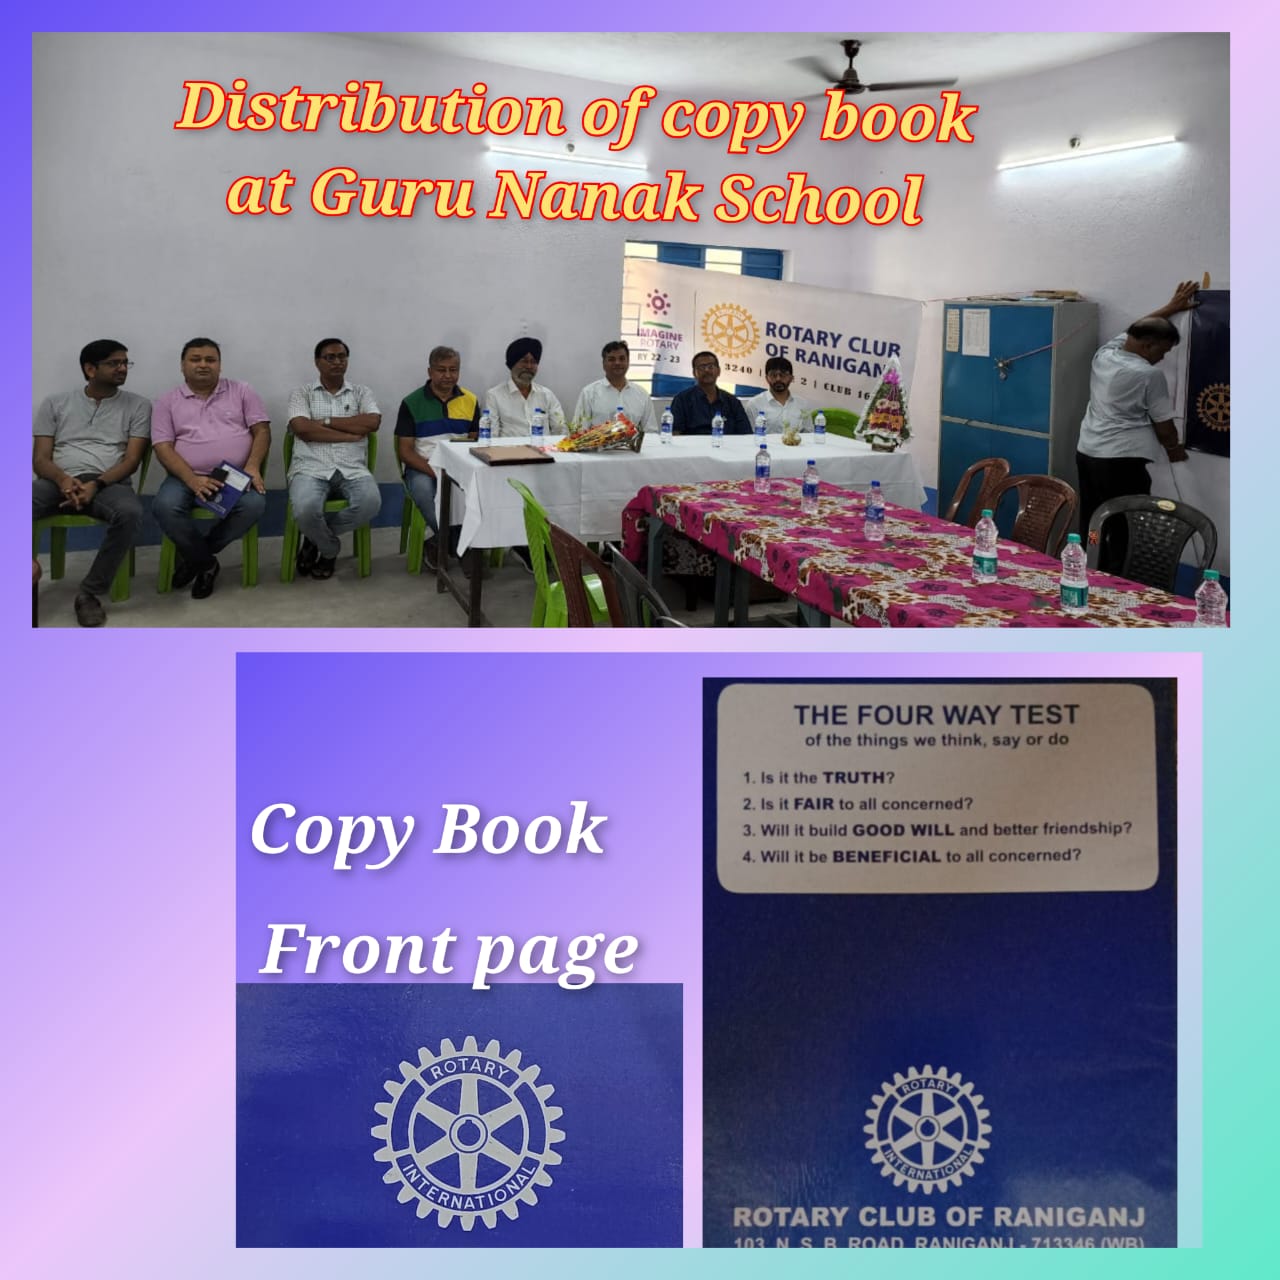 Distribution of Copy Books to the students of Gurunanak School , Raniganj under Literacy Project